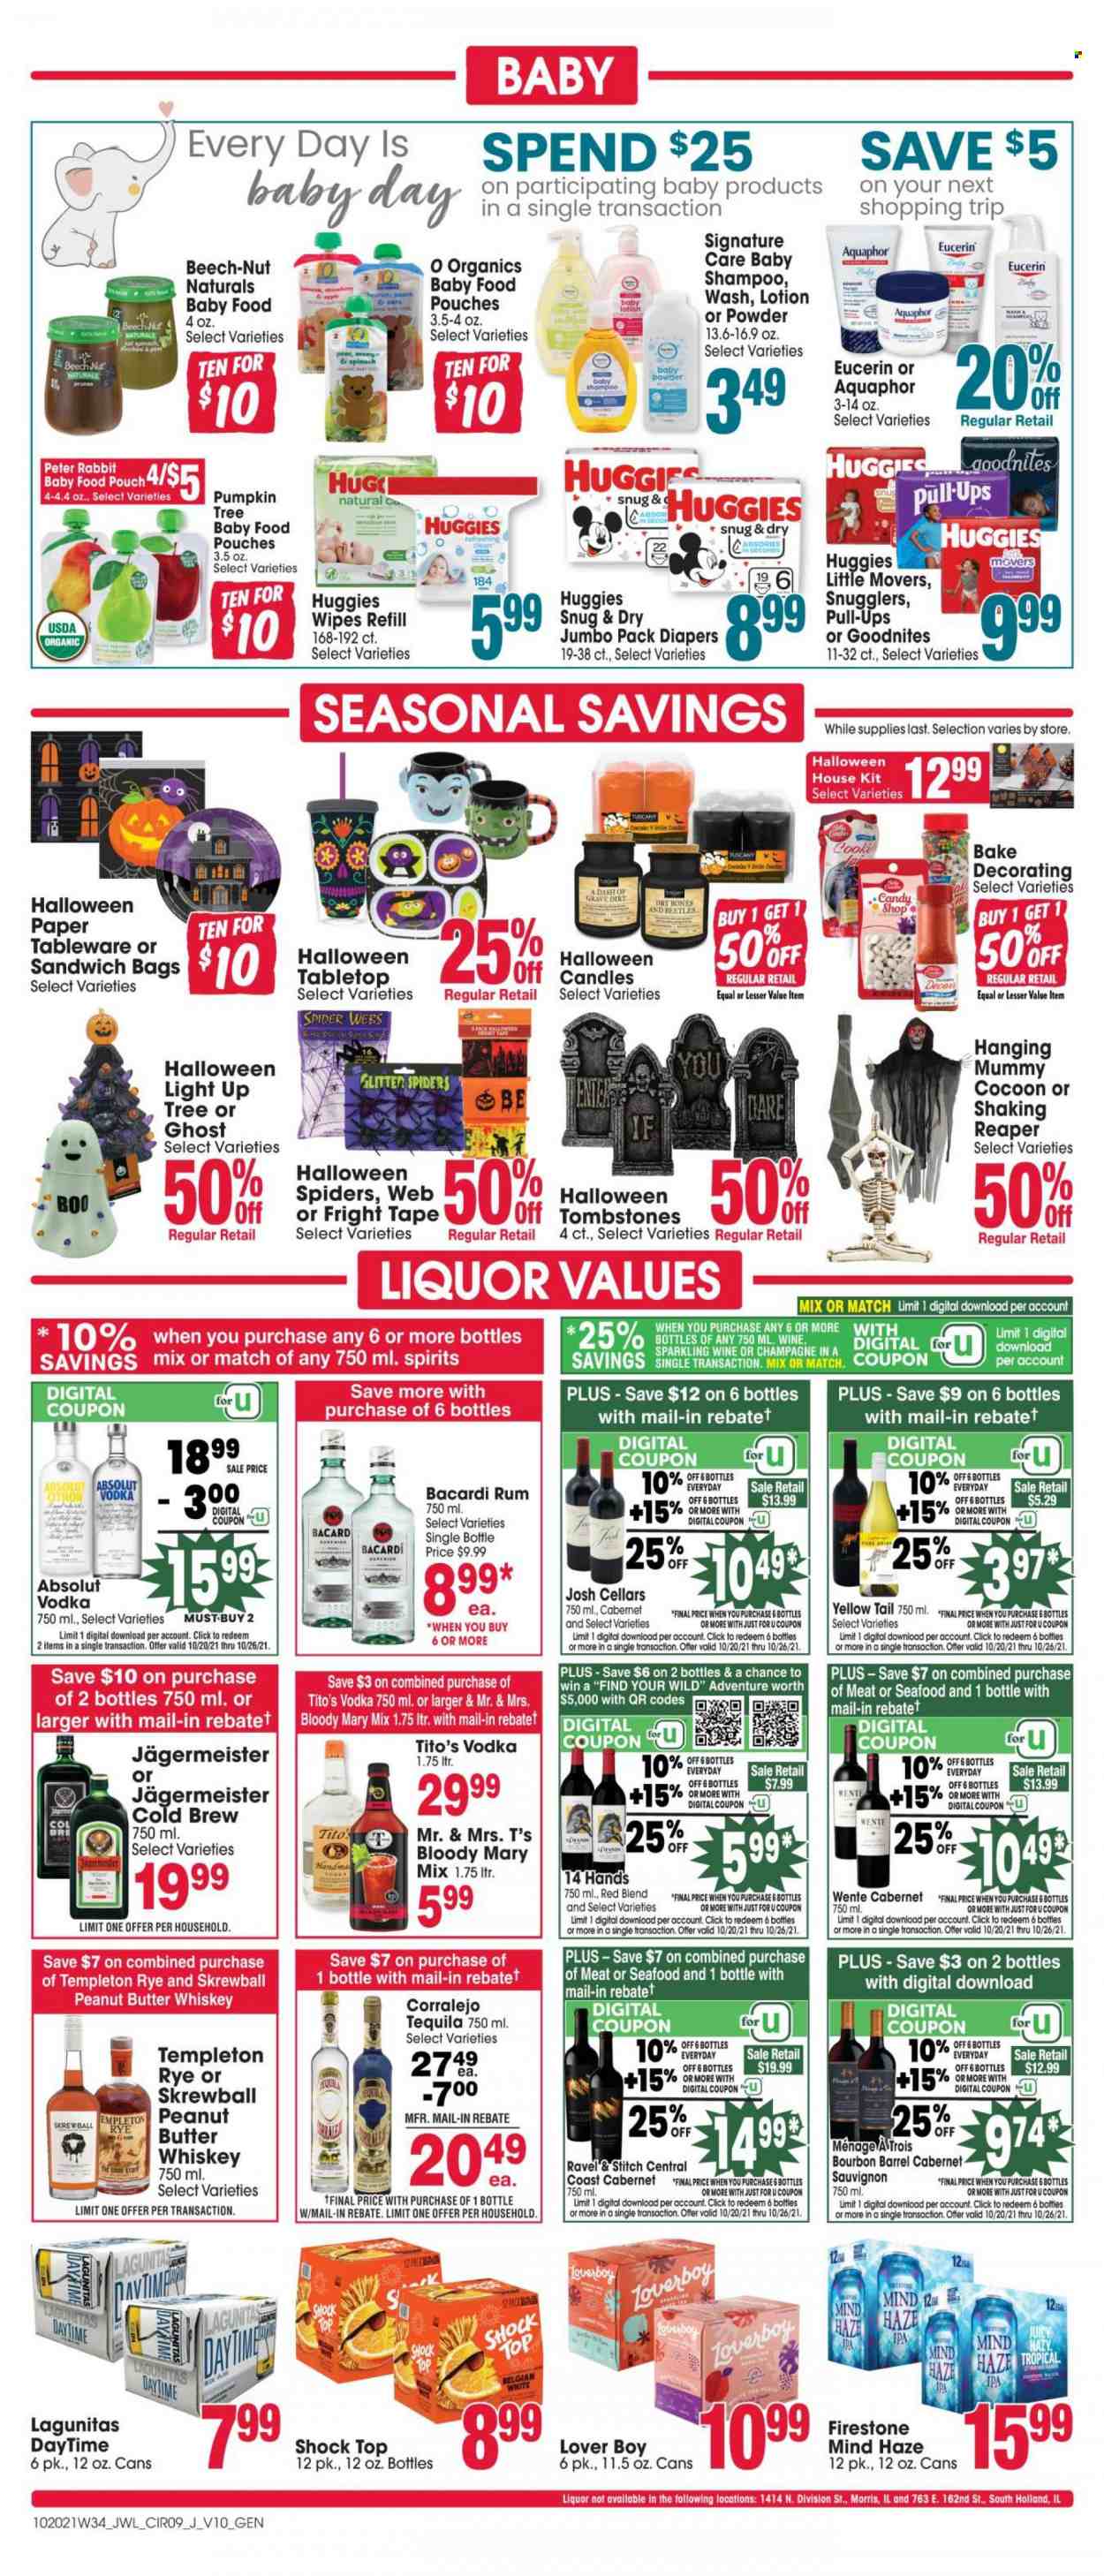 thumbnail - Jewel Osco Flyer - 10/20/2021 - 10/26/2021 - Sales products - pumpkin, pears, seafood, peanut butter, Cabernet Sauvignon, sparkling wine, wine, Bacardi, rum, tequila, vodka, whiskey, Absolut, Jägermeister, whisky, IPA, baby food pouch, wipes, Huggies, nappies, Aquaphor, baby powder, shampoo, body lotion, Eucerin, bag, tableware, glitter, candle. Page 9.